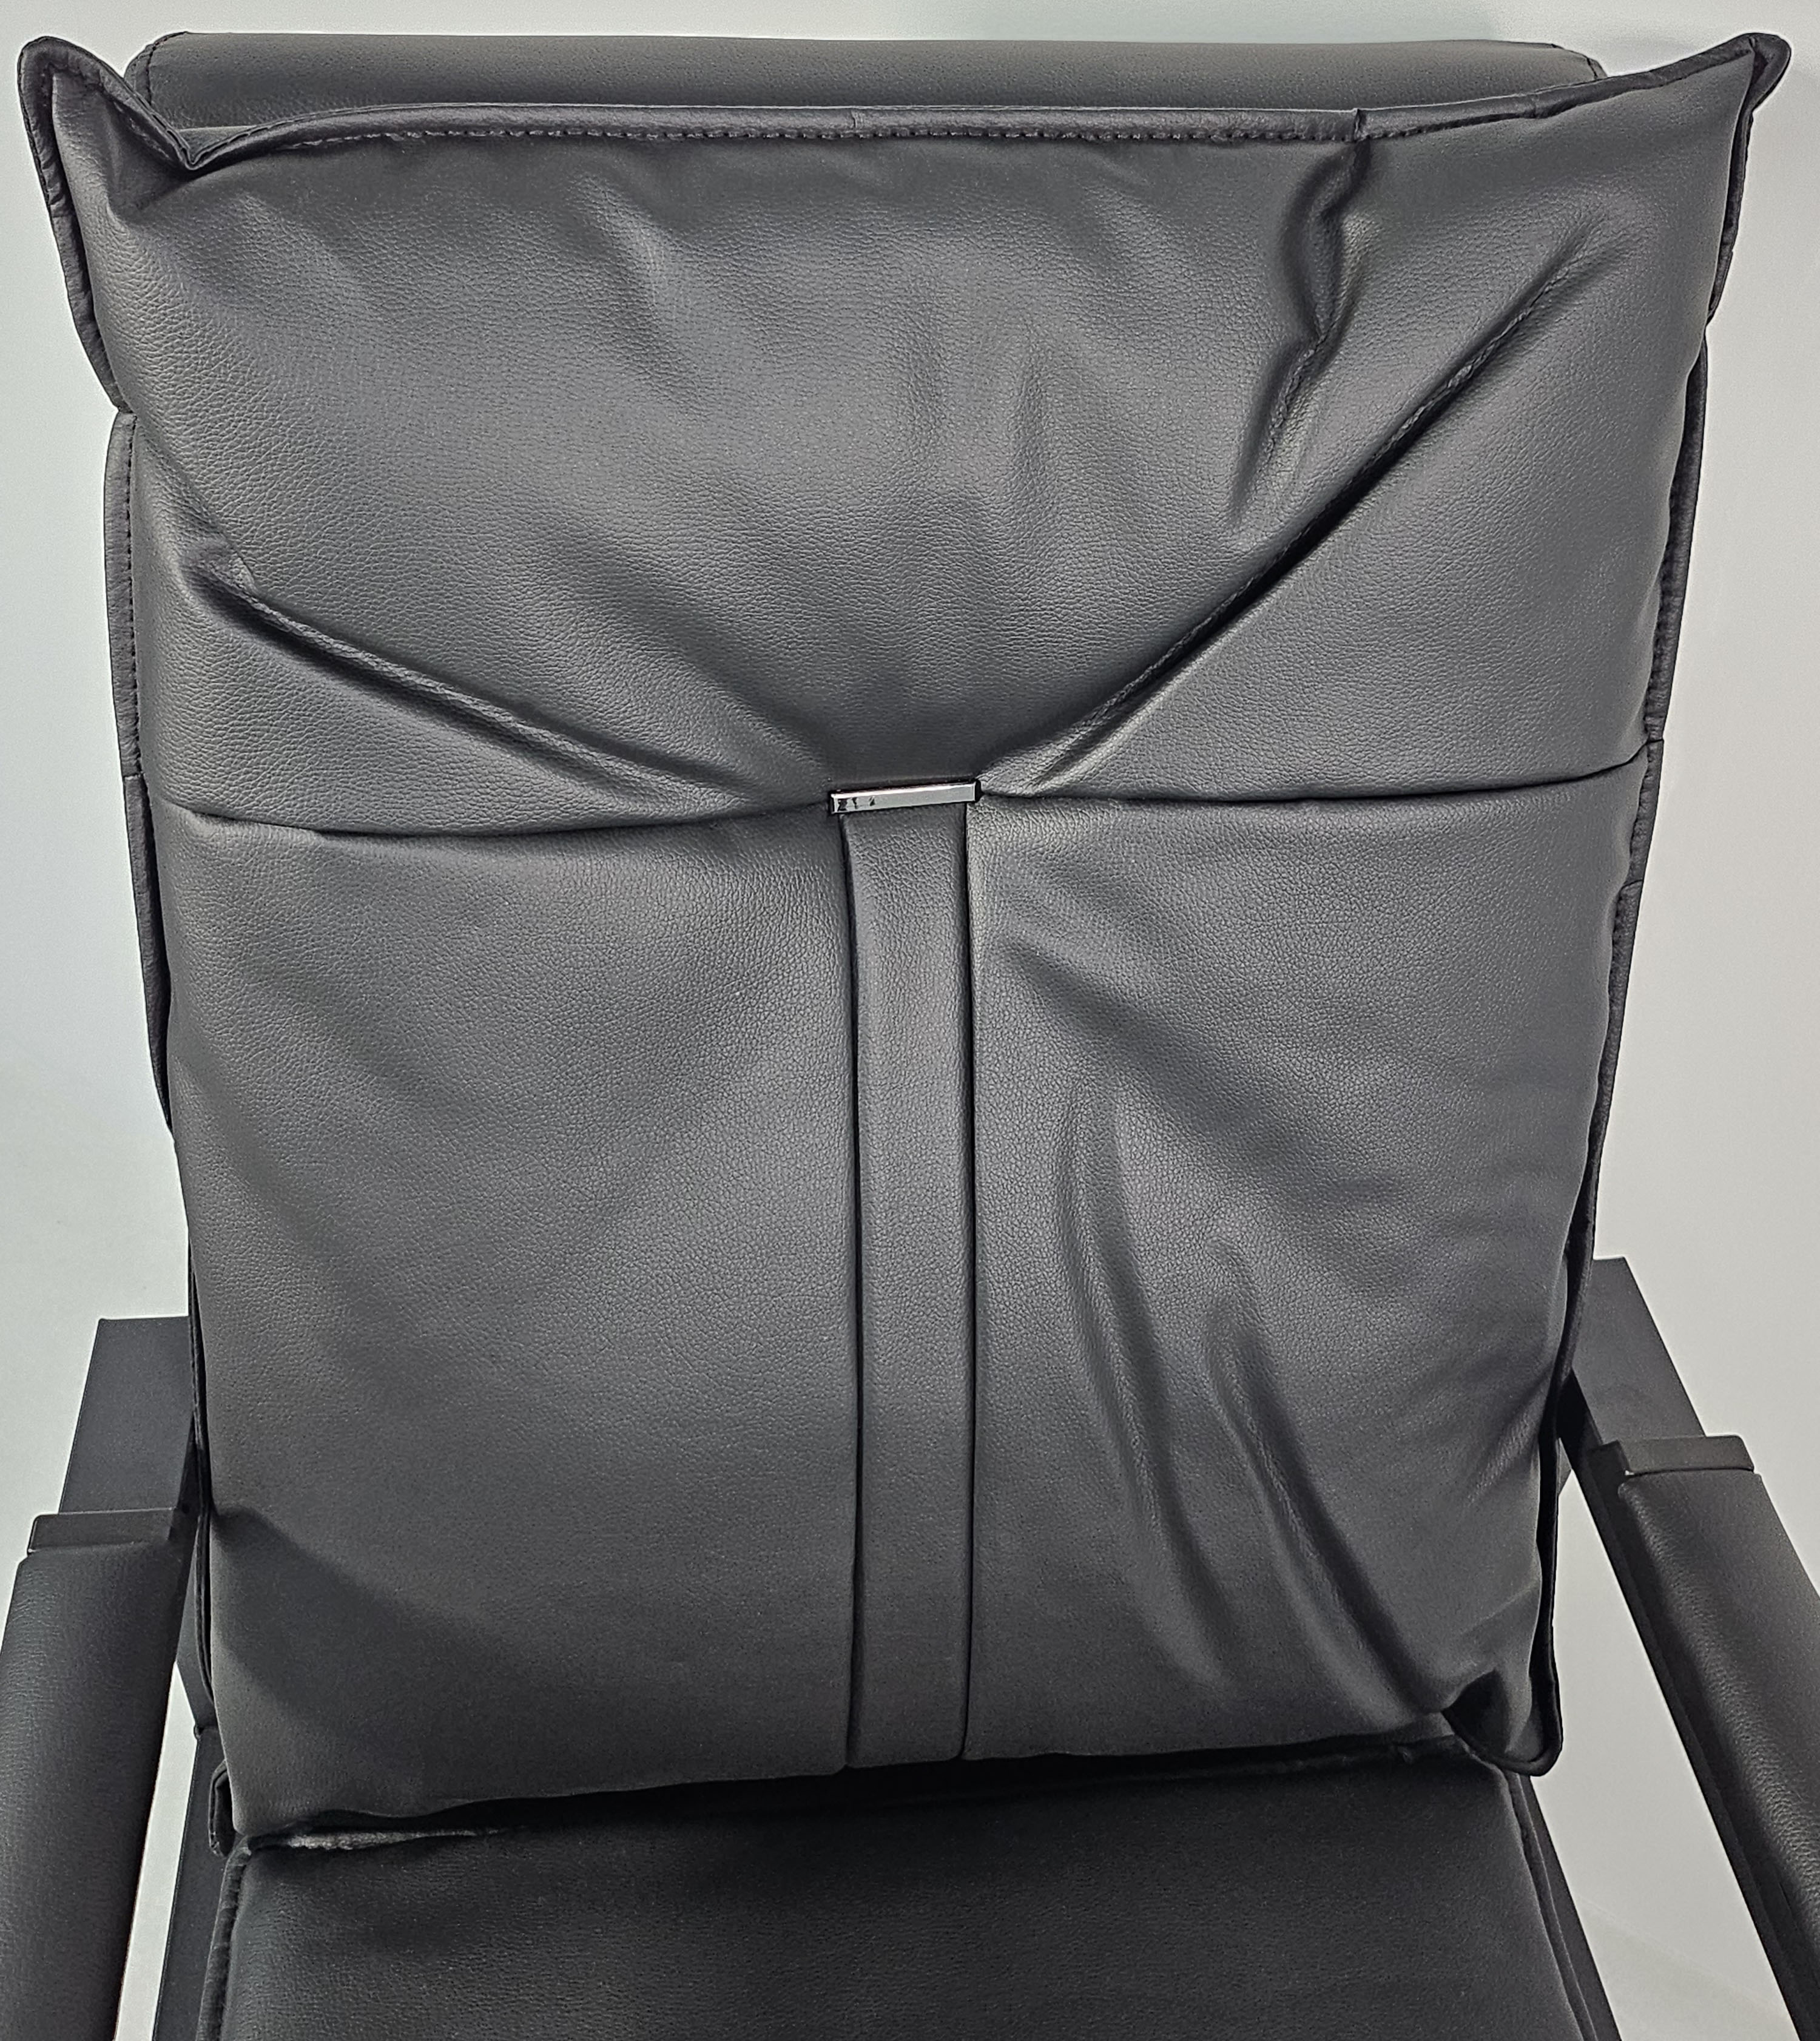 Black Leather Visitor Chair with Steel Frame - 012